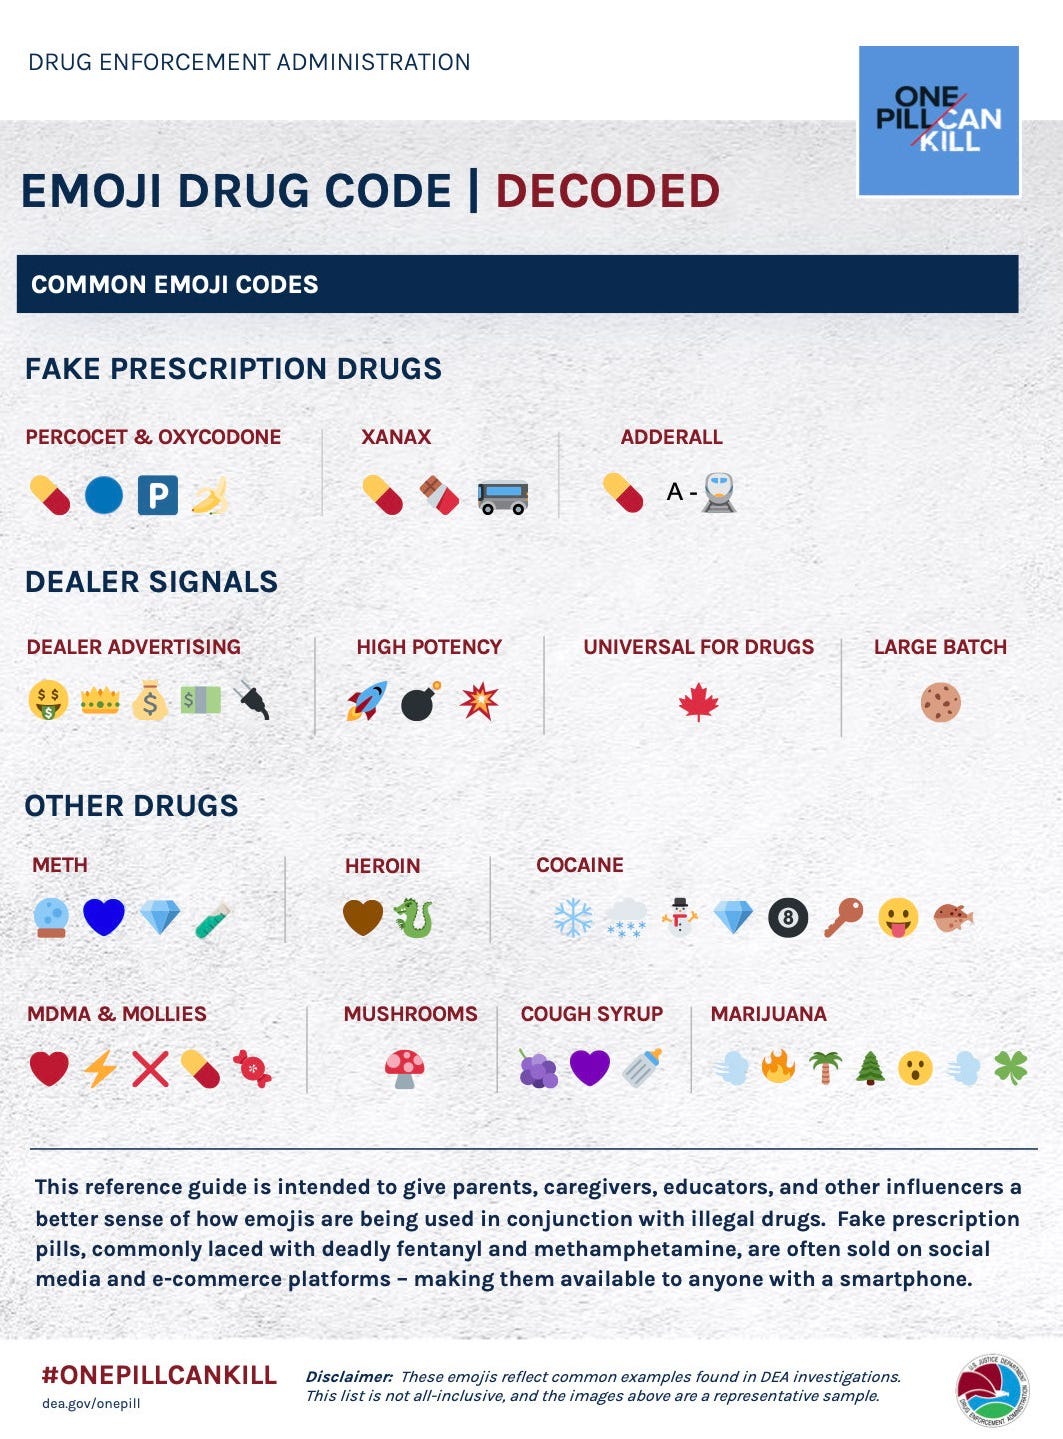 A graphic from DEA.gov site shows how people, especially young people, are purchasing and selling counterfeit prescription drugs.